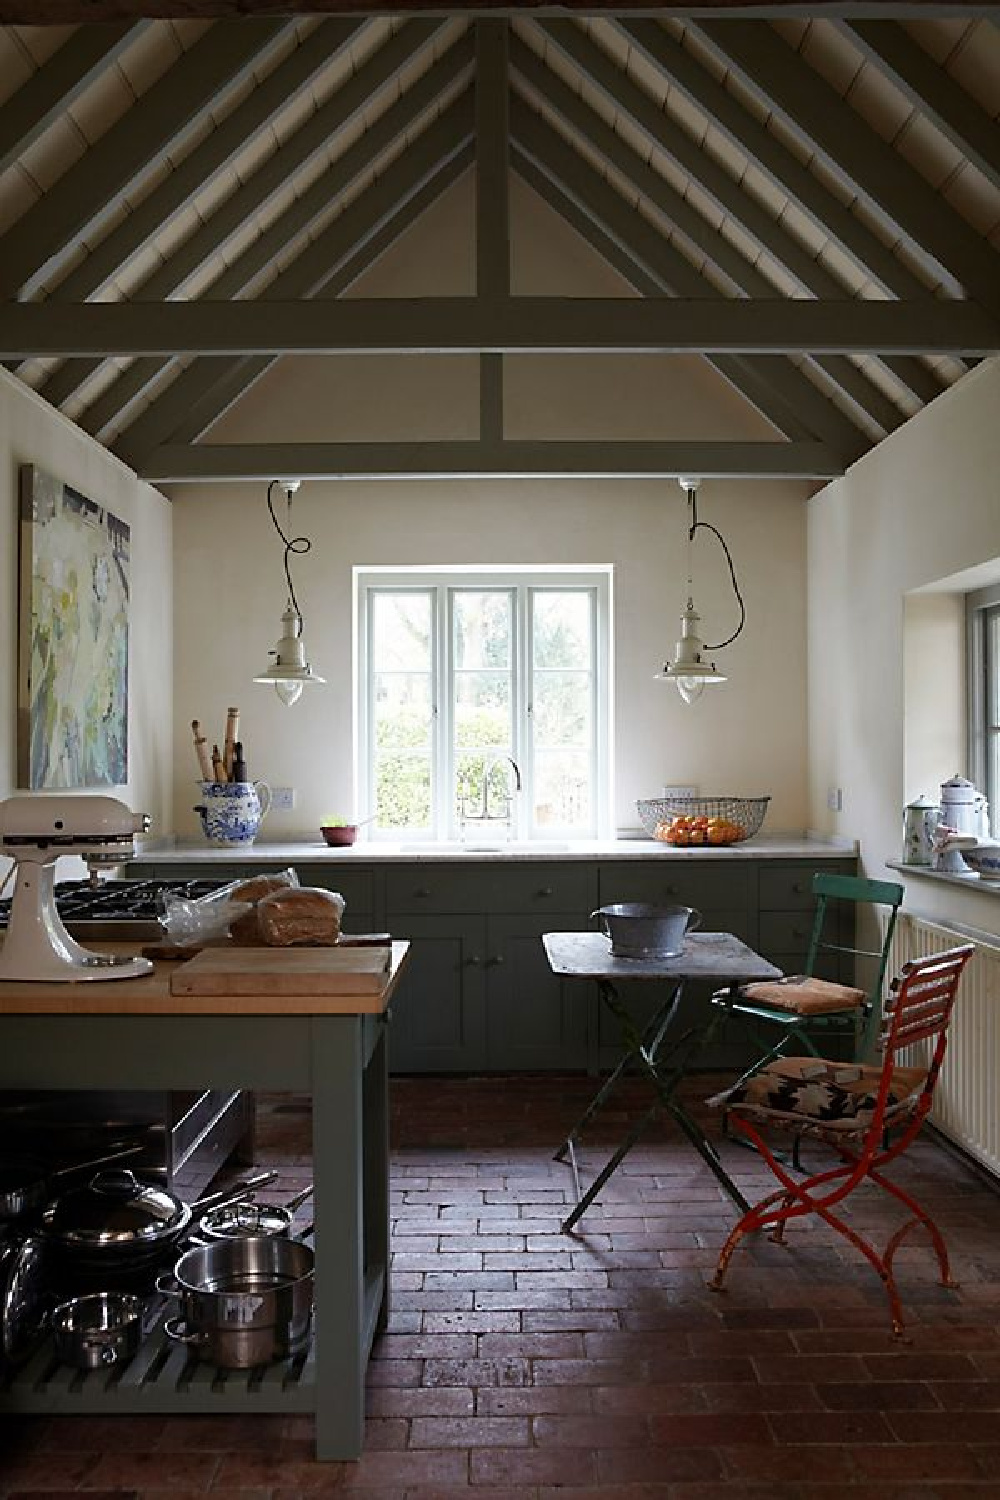 Farrow & Ball Pointing in an Old World European country kitchen with beautiful rustic wood beams.